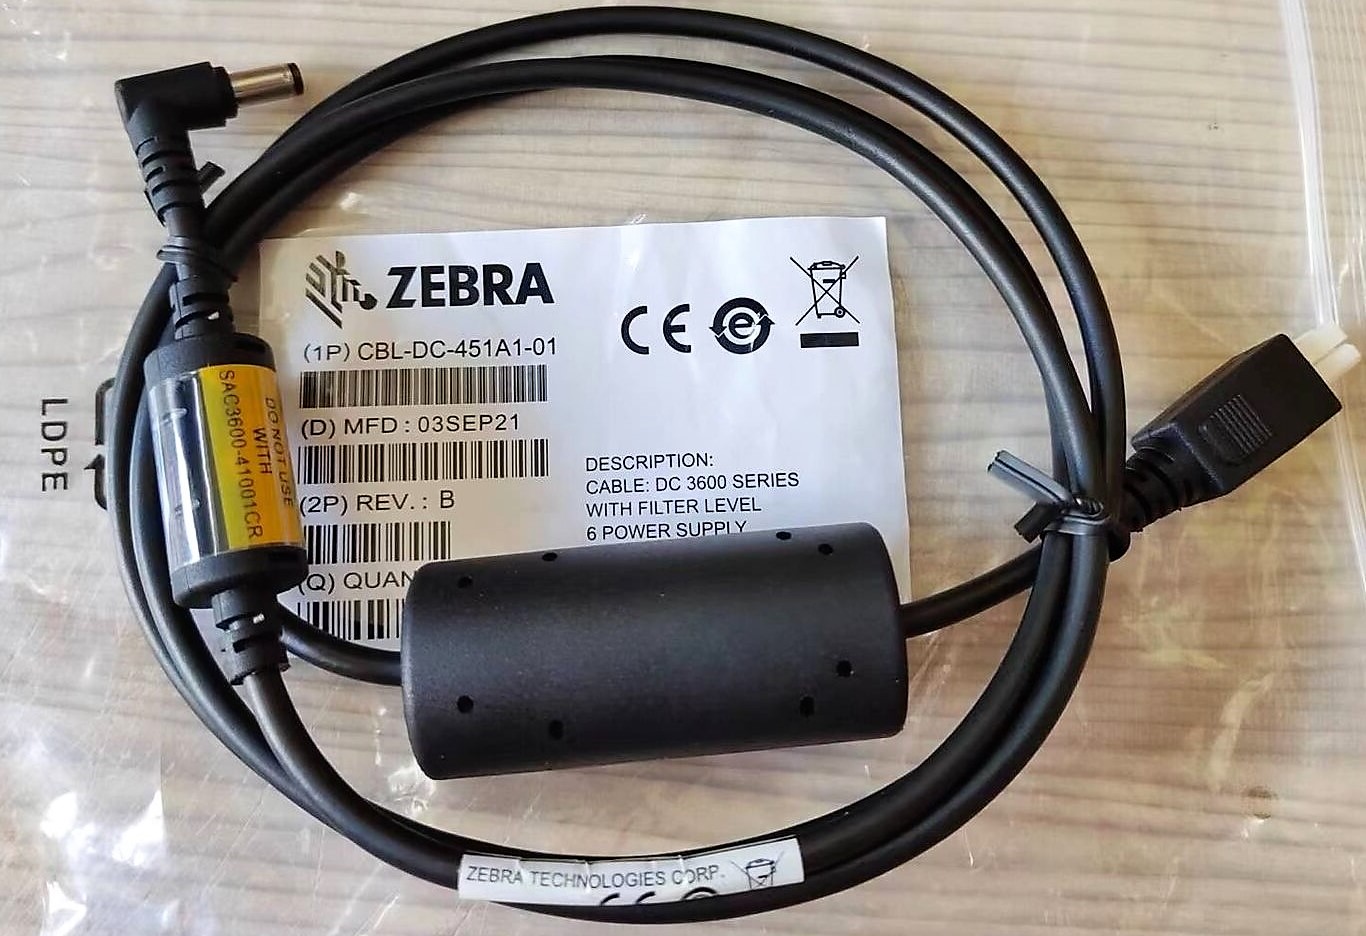 Zebra CBL-DC-451A1-01 Cable DC Power Line Cord for DS3678 / STB3678